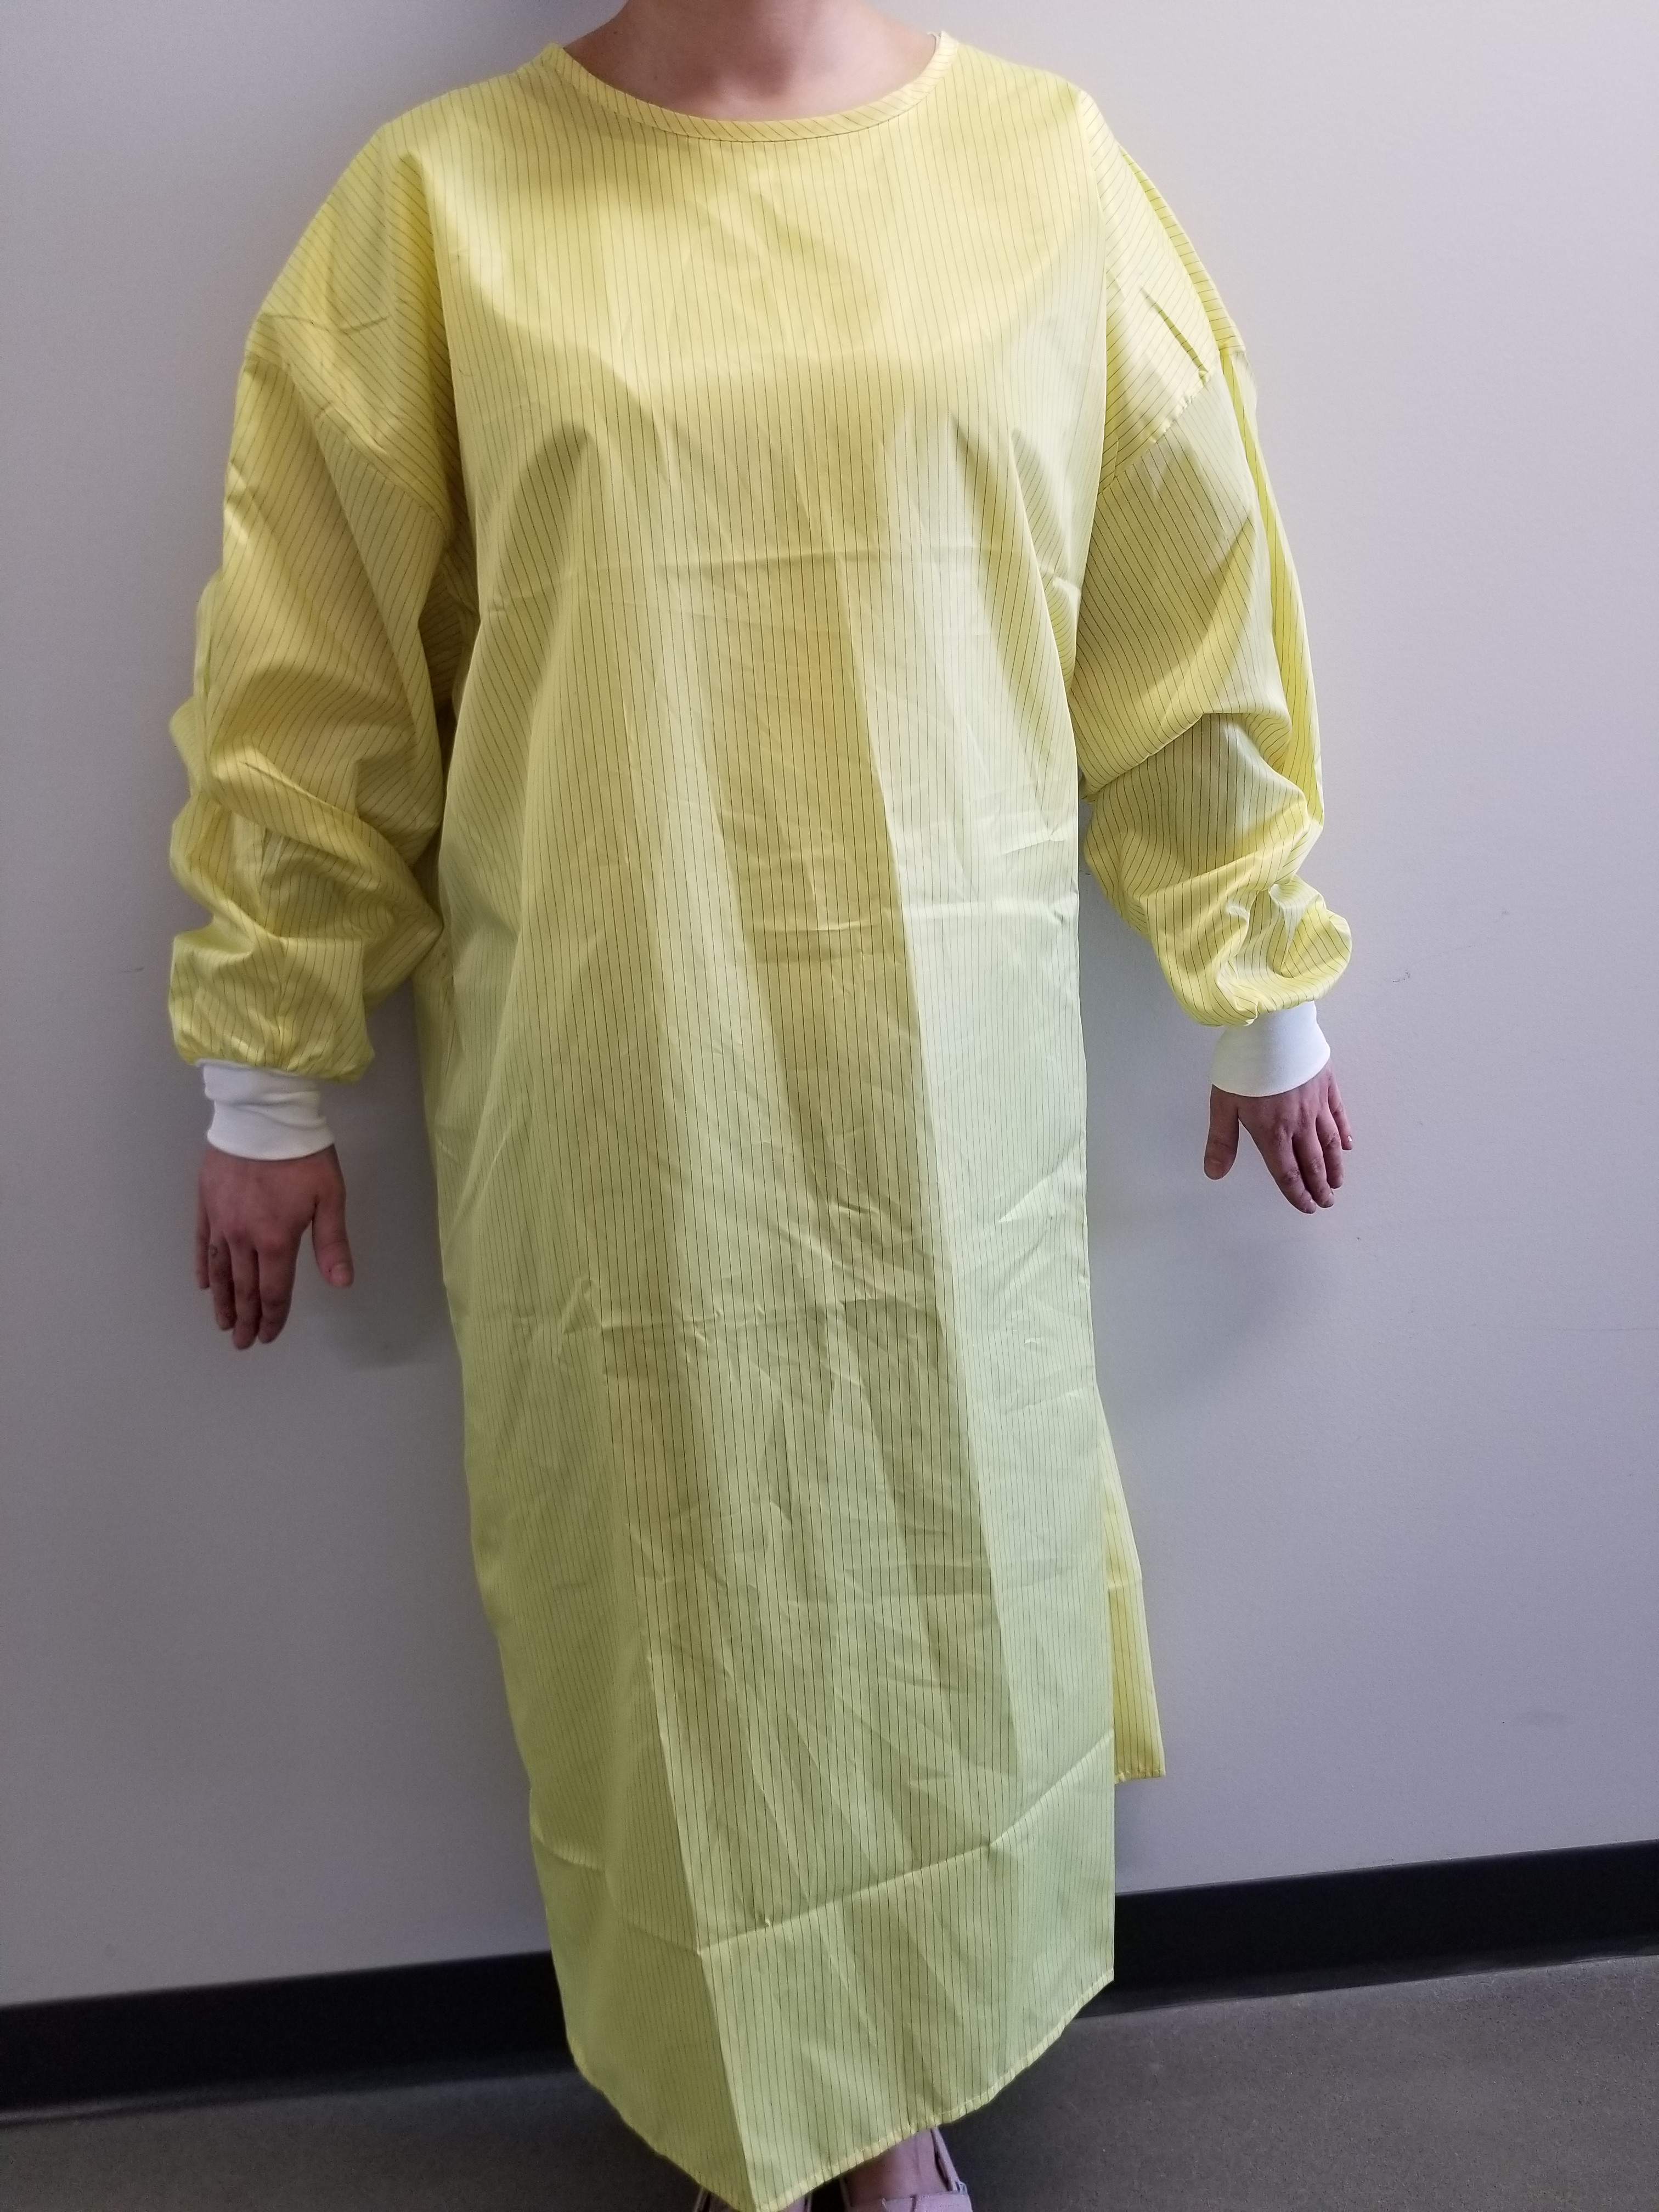 Reusable Isolation Gown Level 2 - Pack of 6